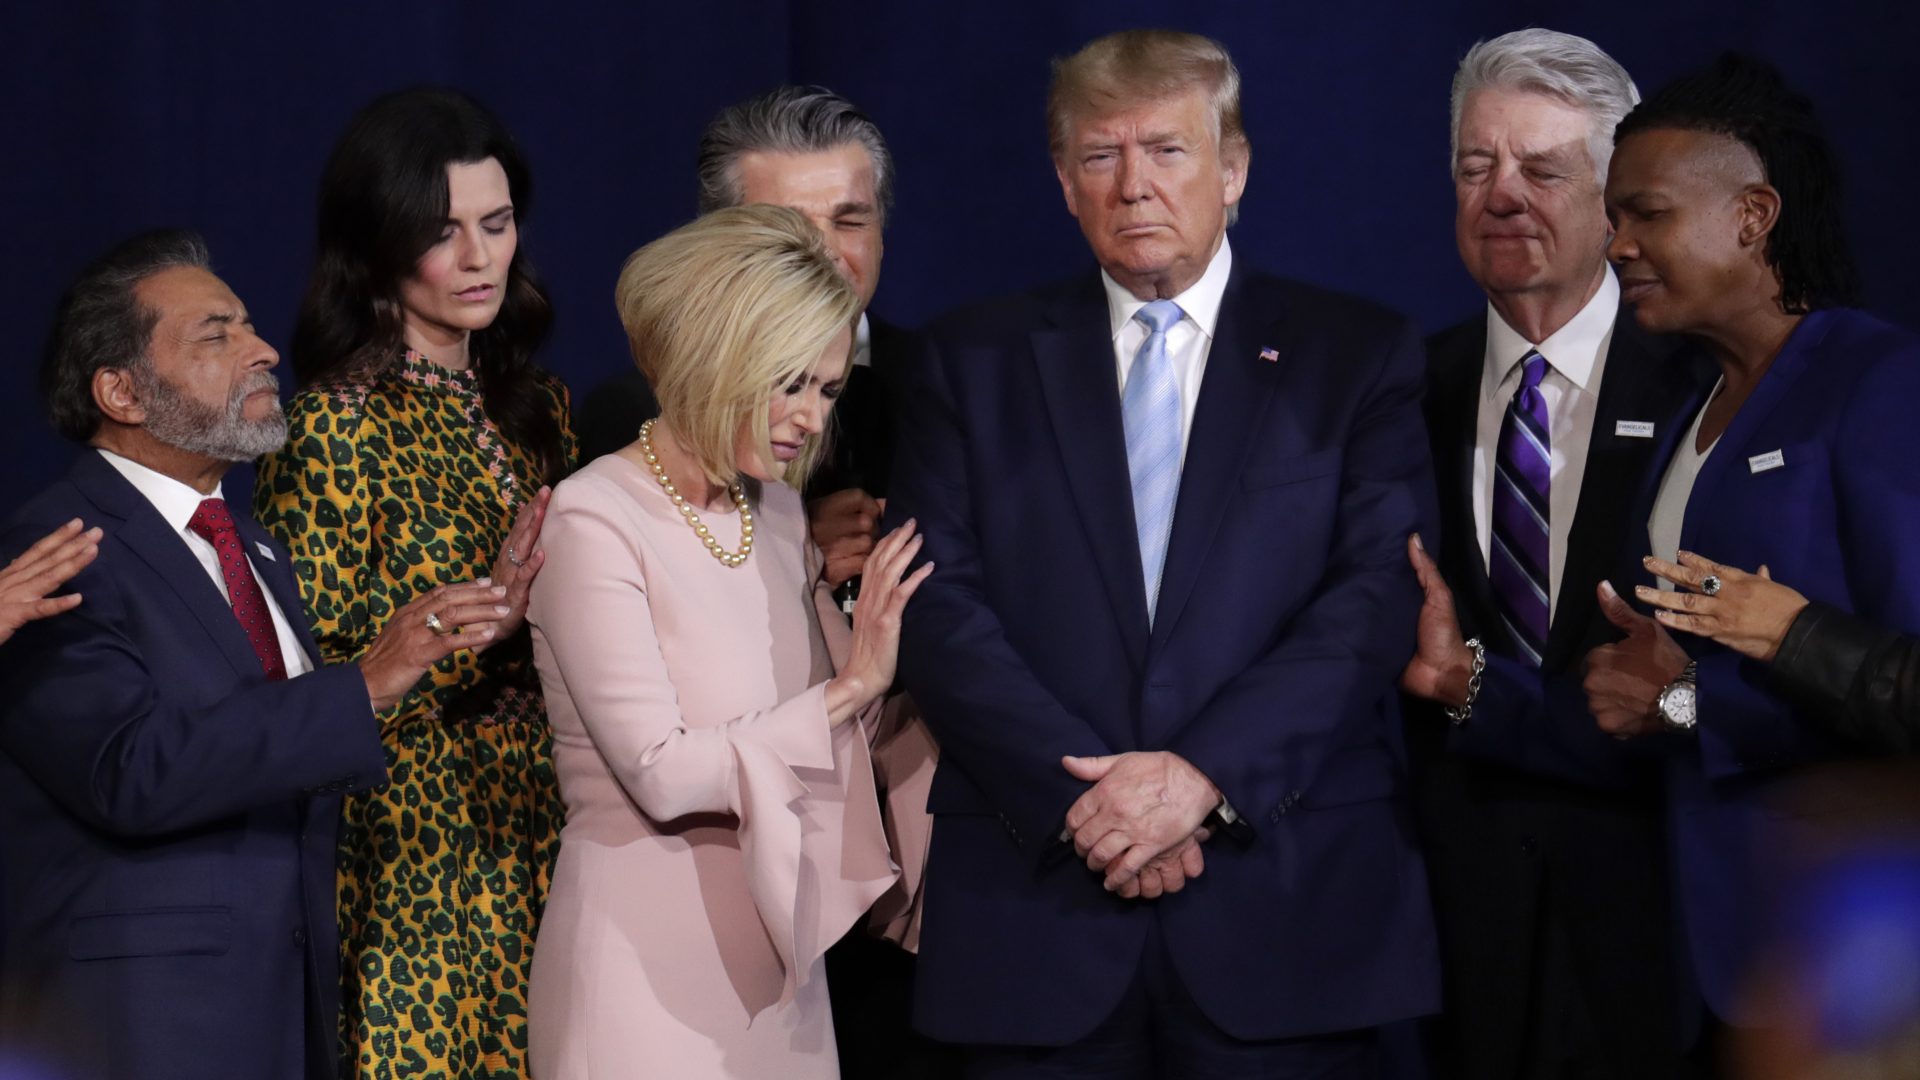 Faith leaders pray with President Trump during a rally for evangelical supporters at the King Jesus International Ministry church in Miami earlier this month.